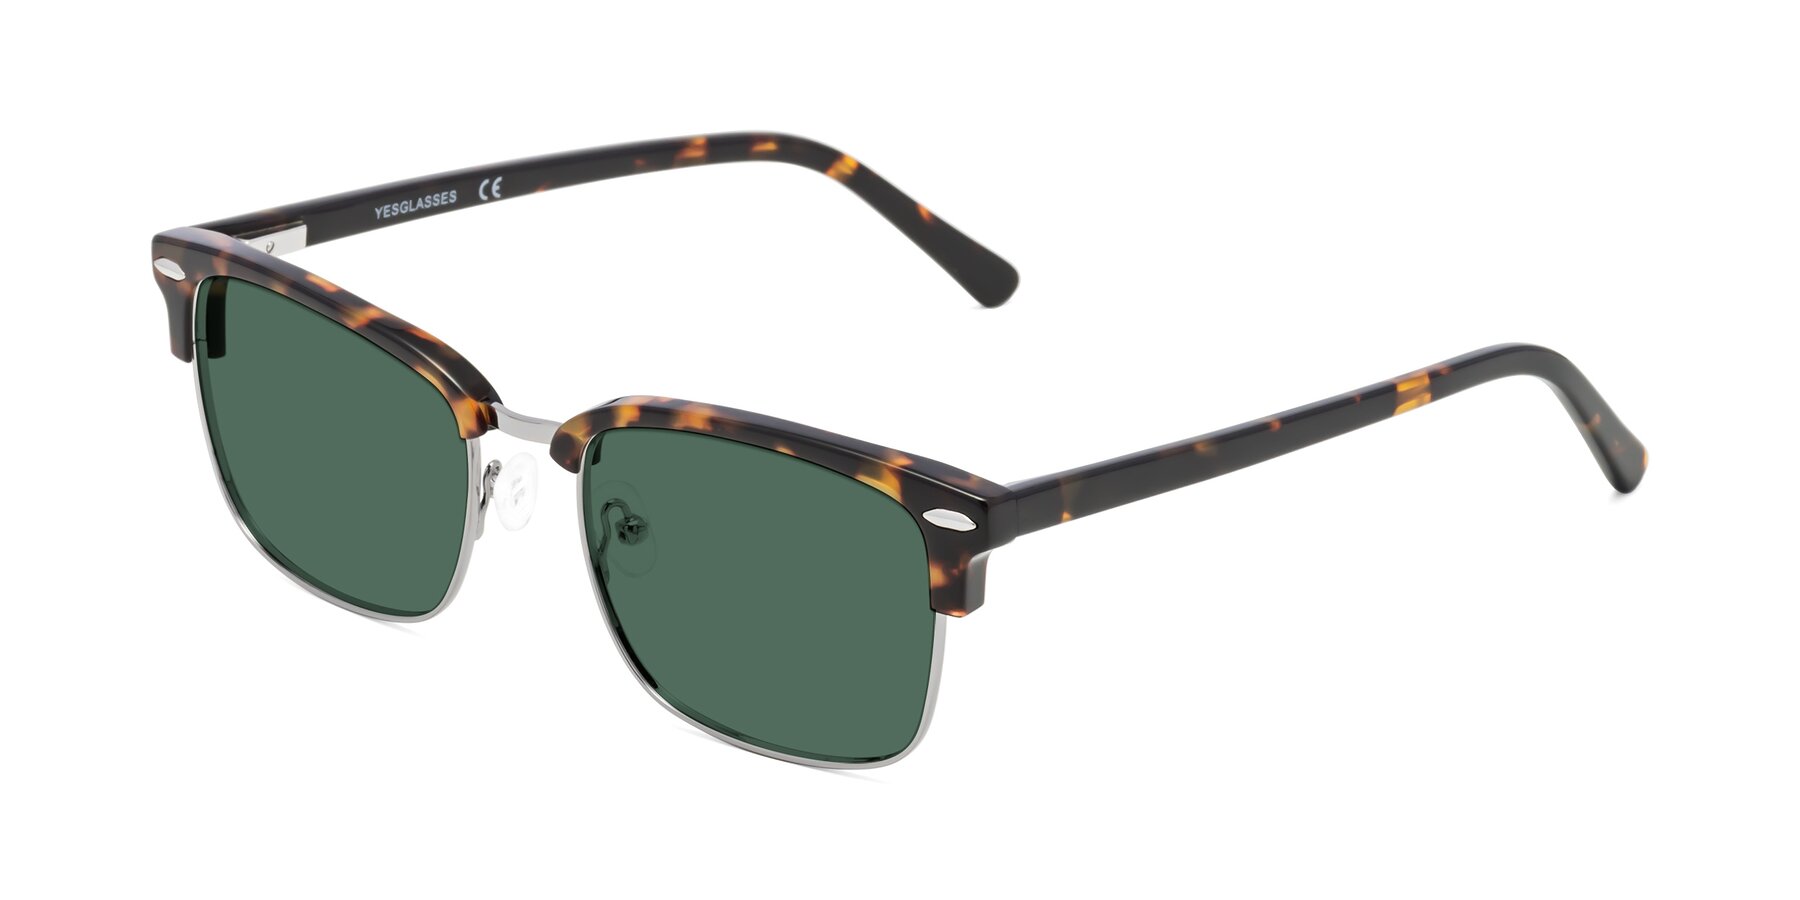 Angle of 17464 in Tortoise/ Gunmetal with Green Polarized Lenses